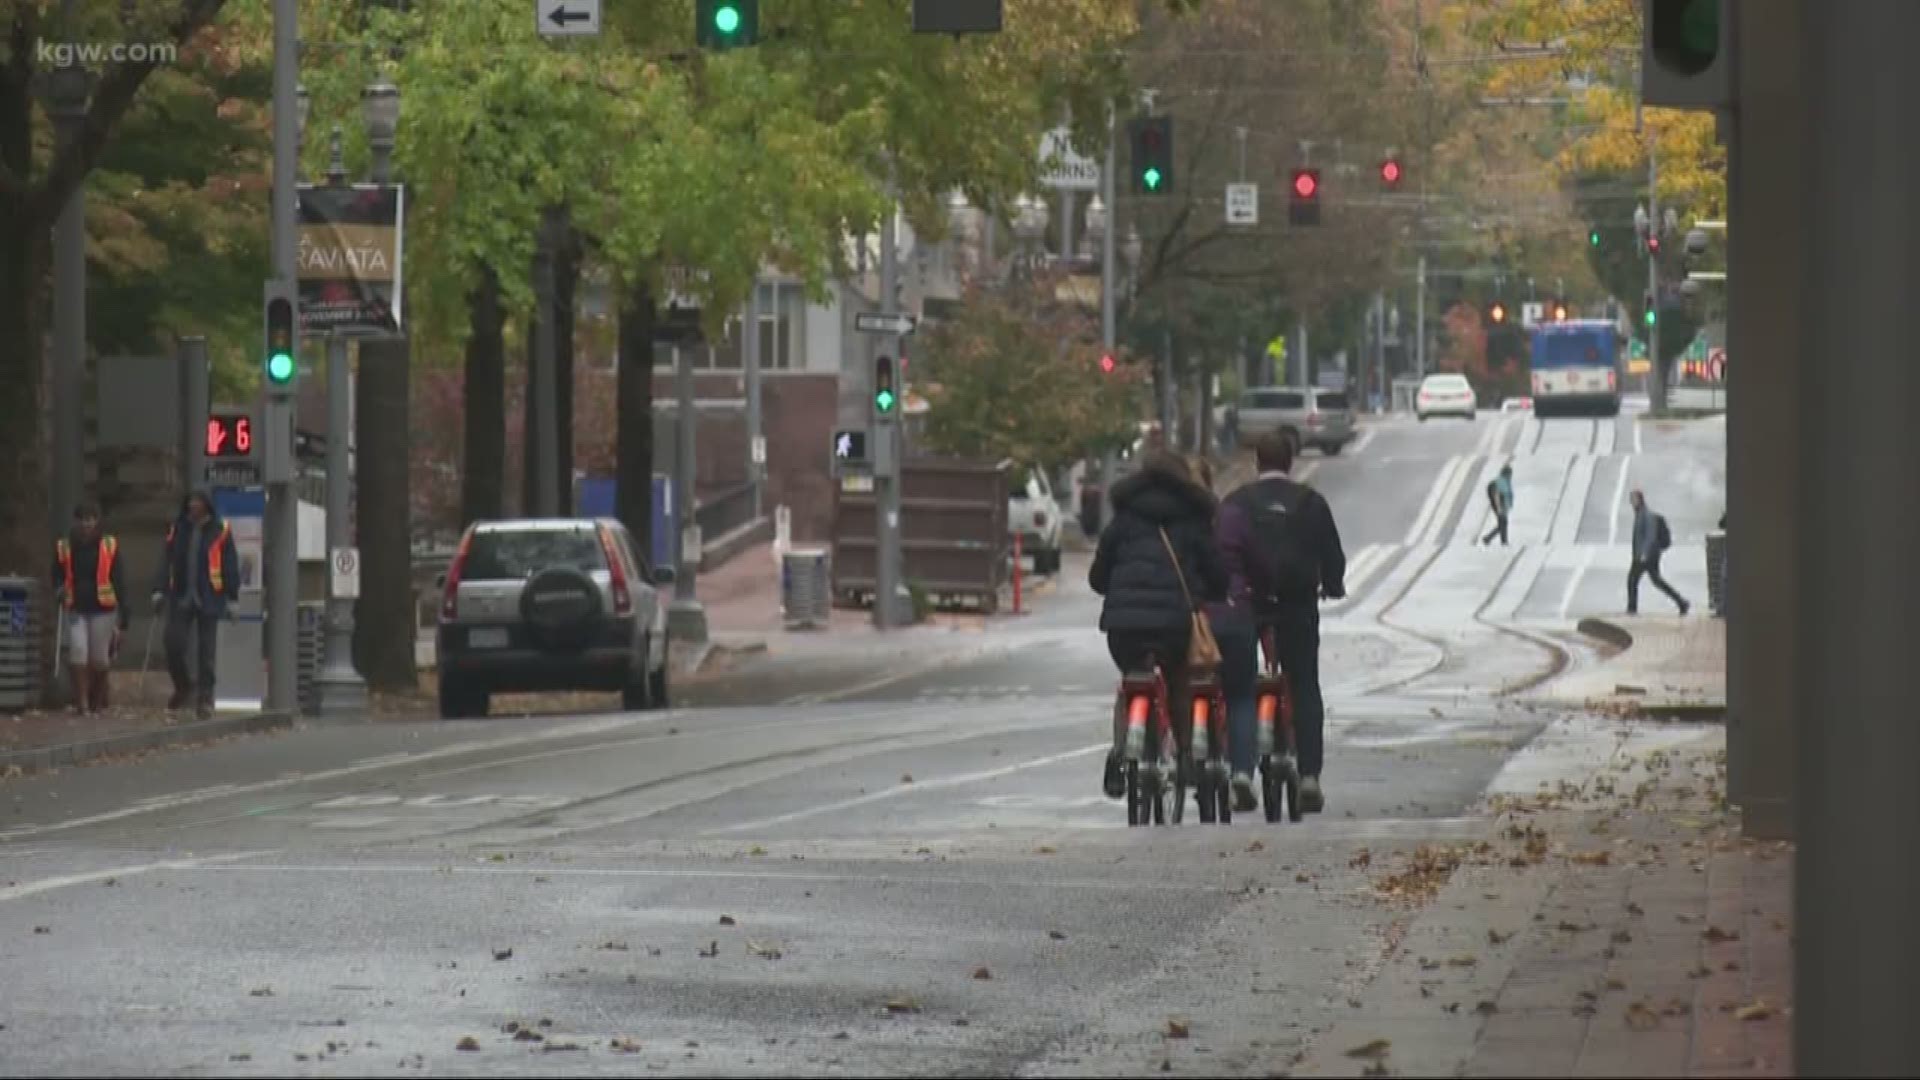 Businesses suggest car-free area downtown